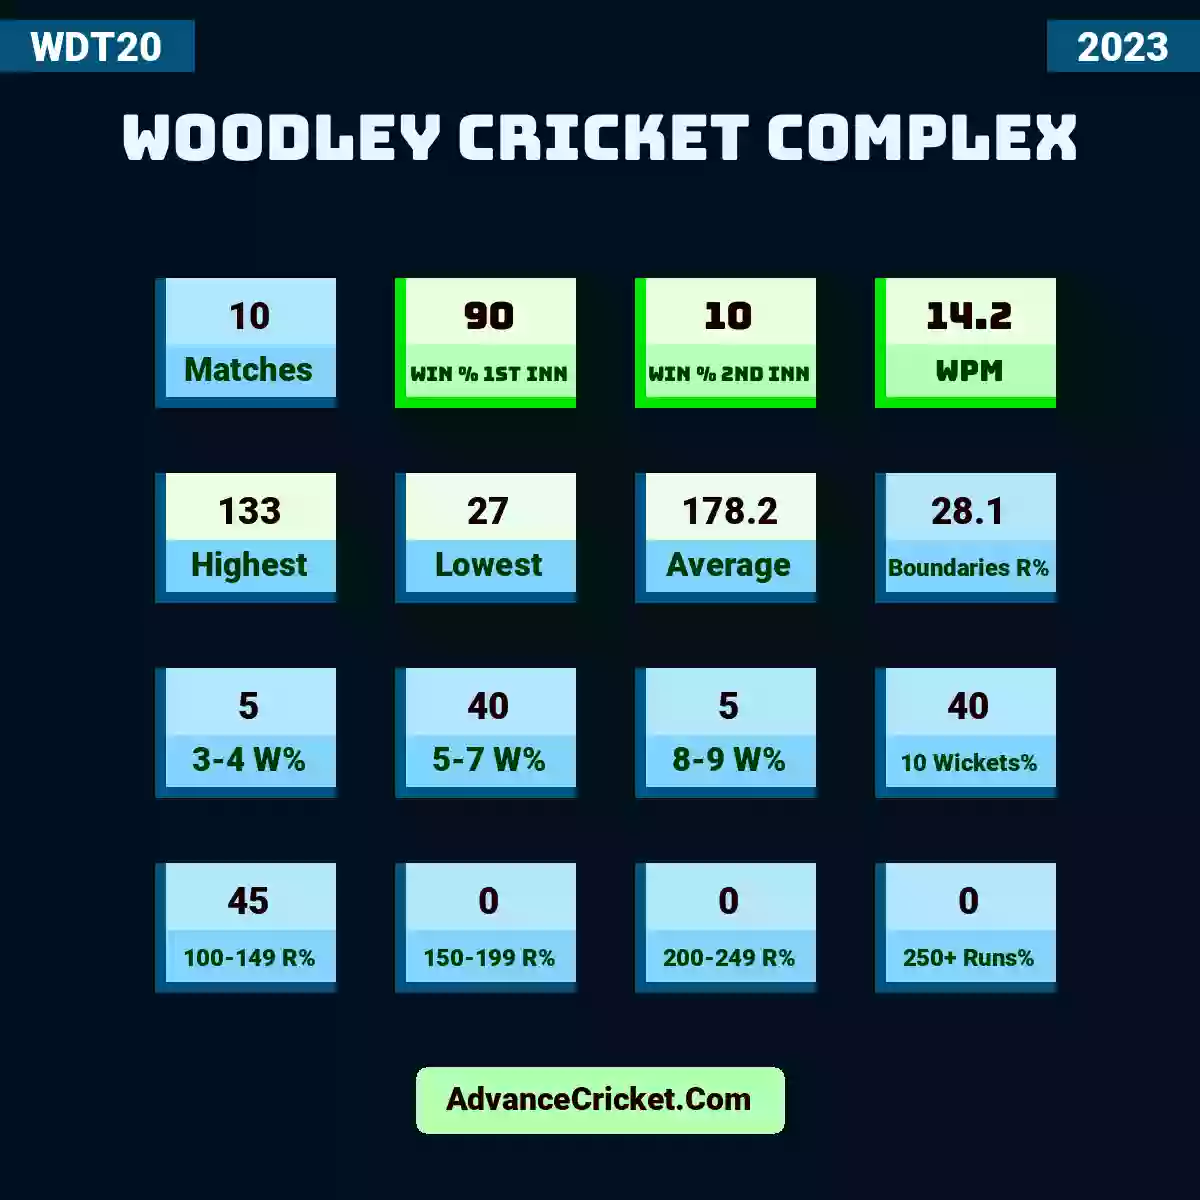 Image showing Woodley Cricket Complex with Matches: 10, Win % 1st Inn: 90, Win % 2nd Inn: 10, WPM: 14.2, Highest: 133, Lowest: 27, Average: 178.2, Boundaries R%: 28.1, 3-4 W%: 5, 5-7 W%: 40, 8-9 W%: 5, 10 Wickets%: 40, 100-149 R%: 45, 150-199 R%: 0, 200-249 R%: 0, 250+ Runs%: 0.